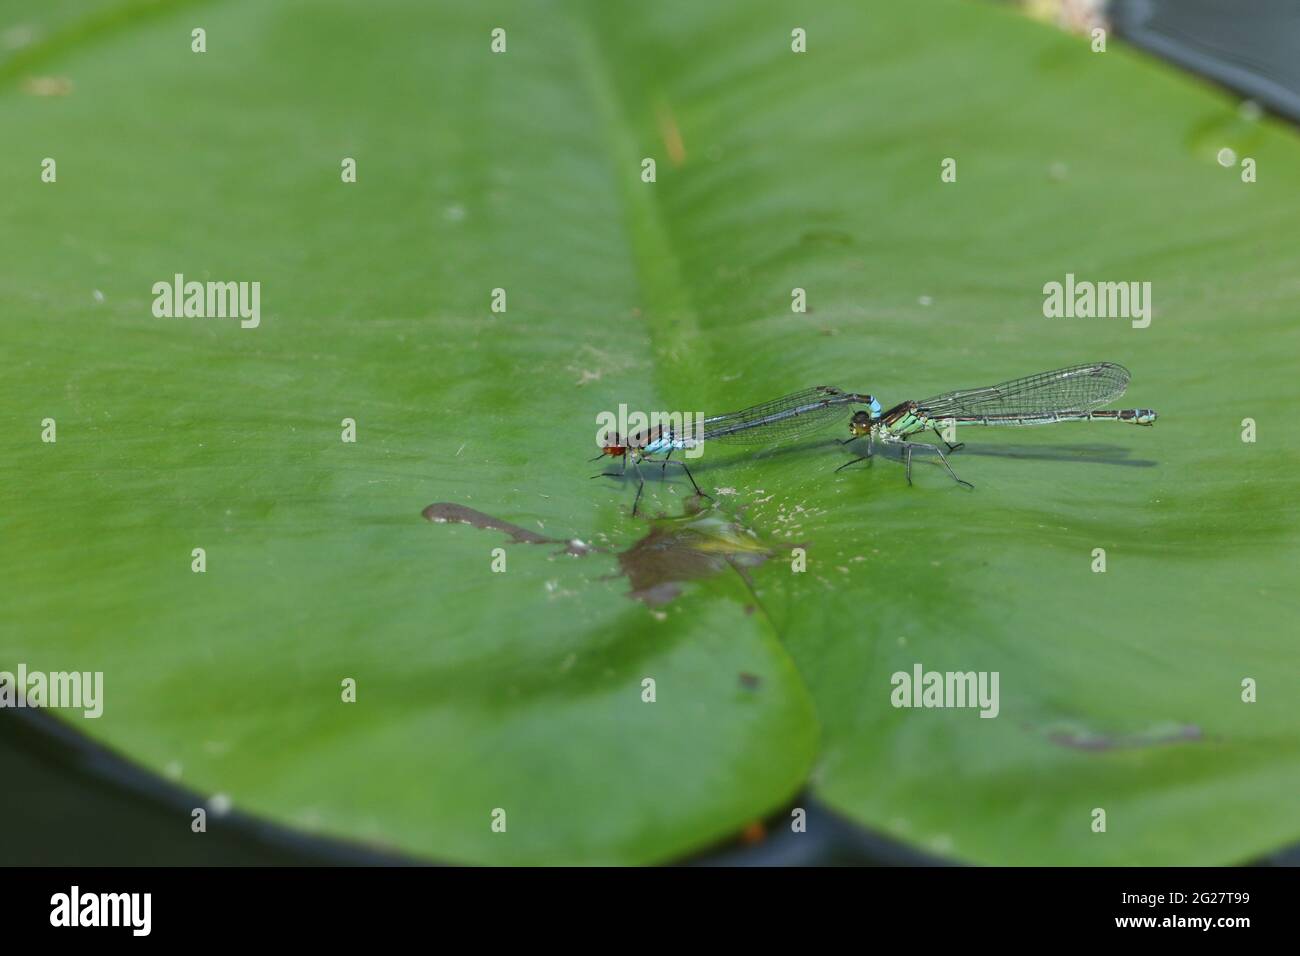 A mating pair of Red-eyed Damselfly, Erythromma najas, resting on a Lily Pad leaf floating on the water. Stock Photo